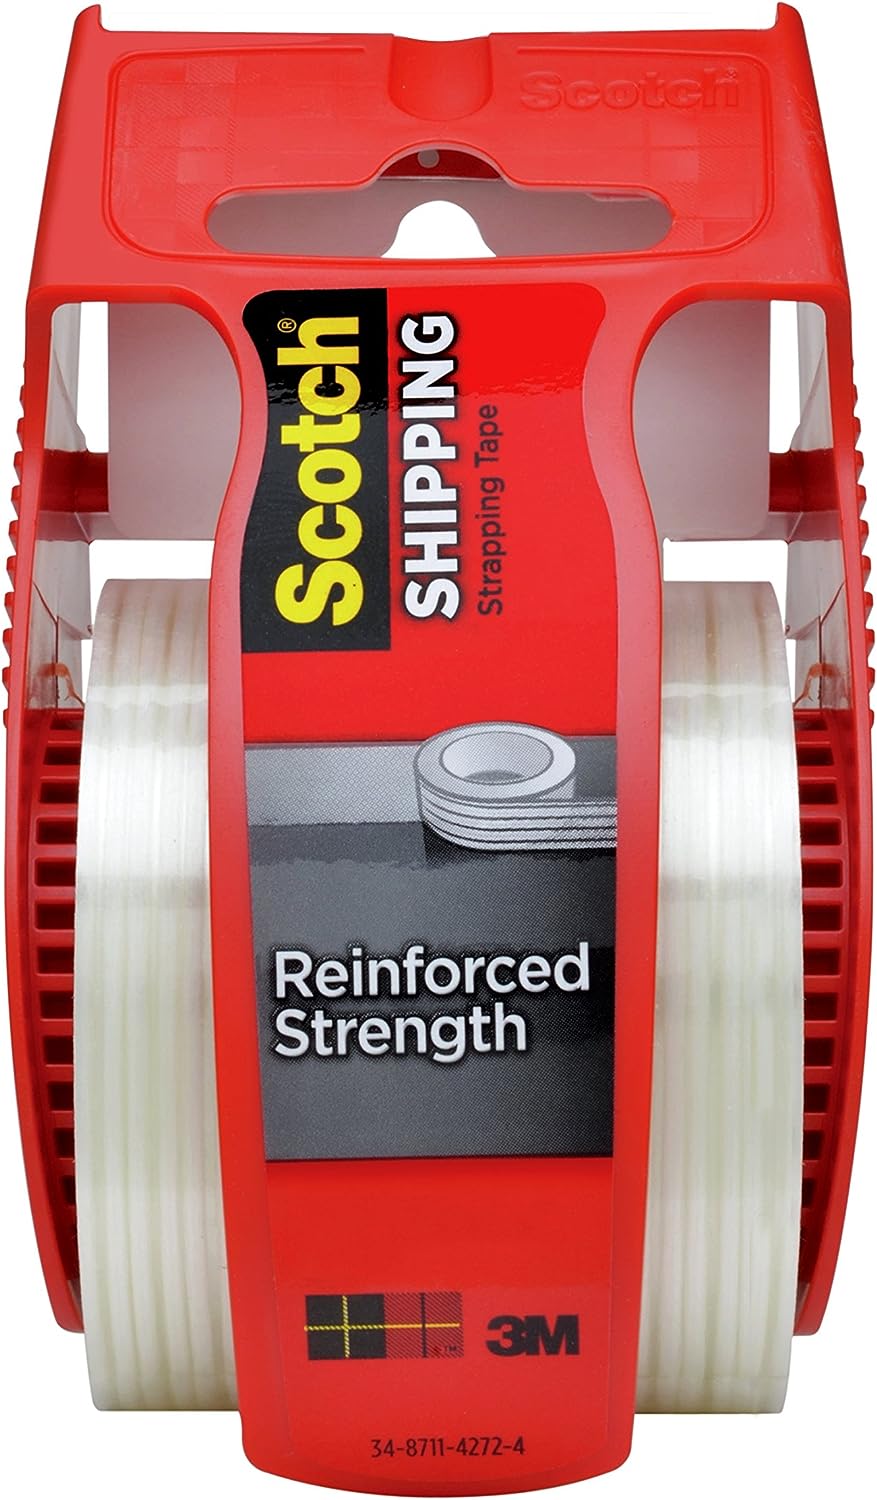 Scotch Reinforced Strength Shipping Strapping Tape [...]